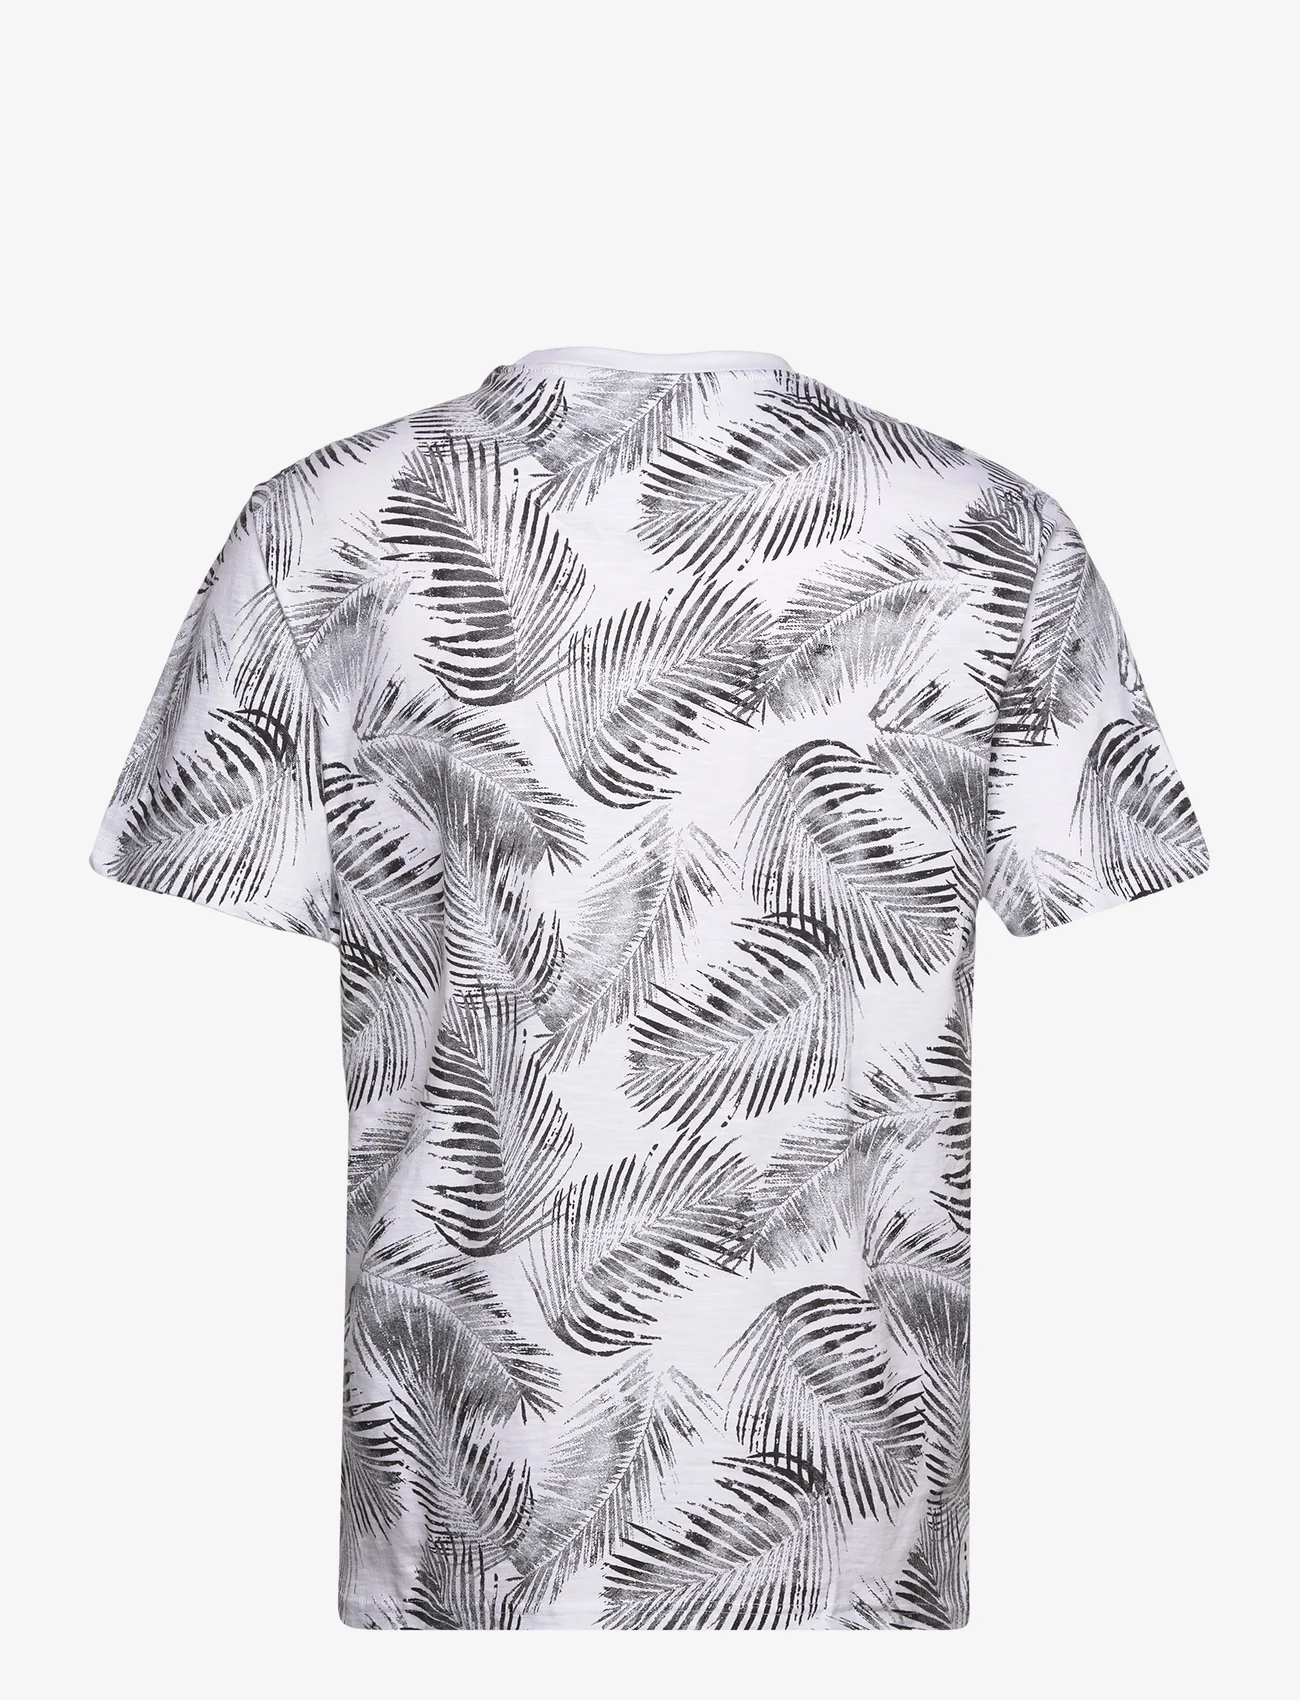 ONLY & SONS - ONSPERRY LIFE REG LEAF AOP SS TEE NOOS - najniższe ceny - bright white - 1